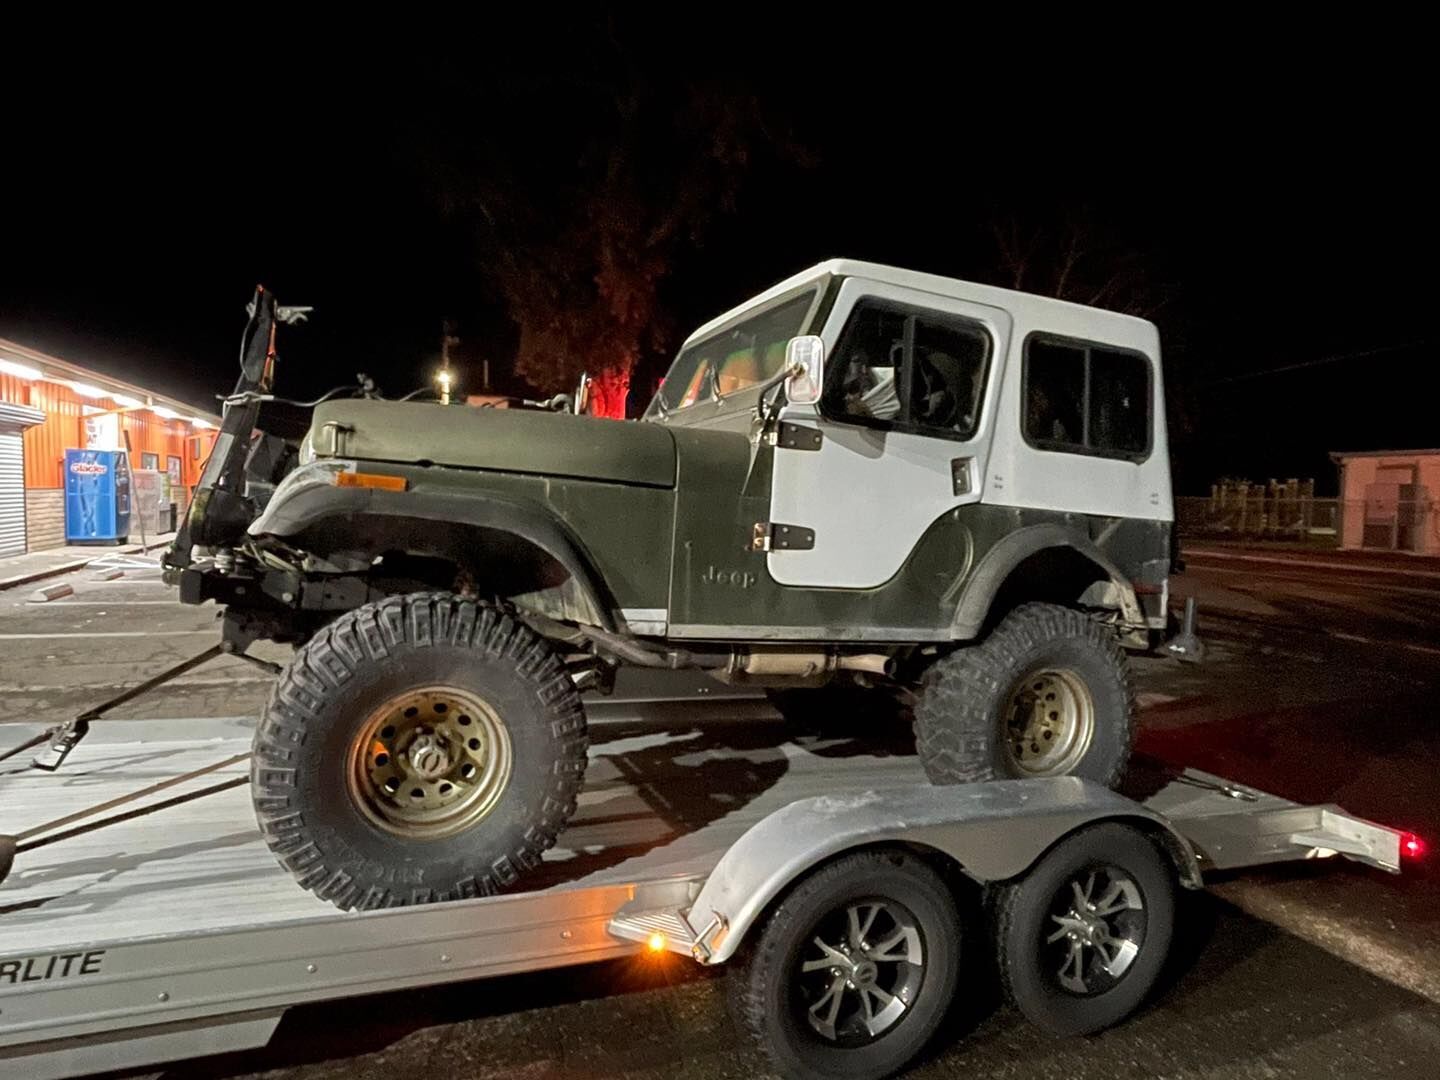 1975 Jeep - SOLD